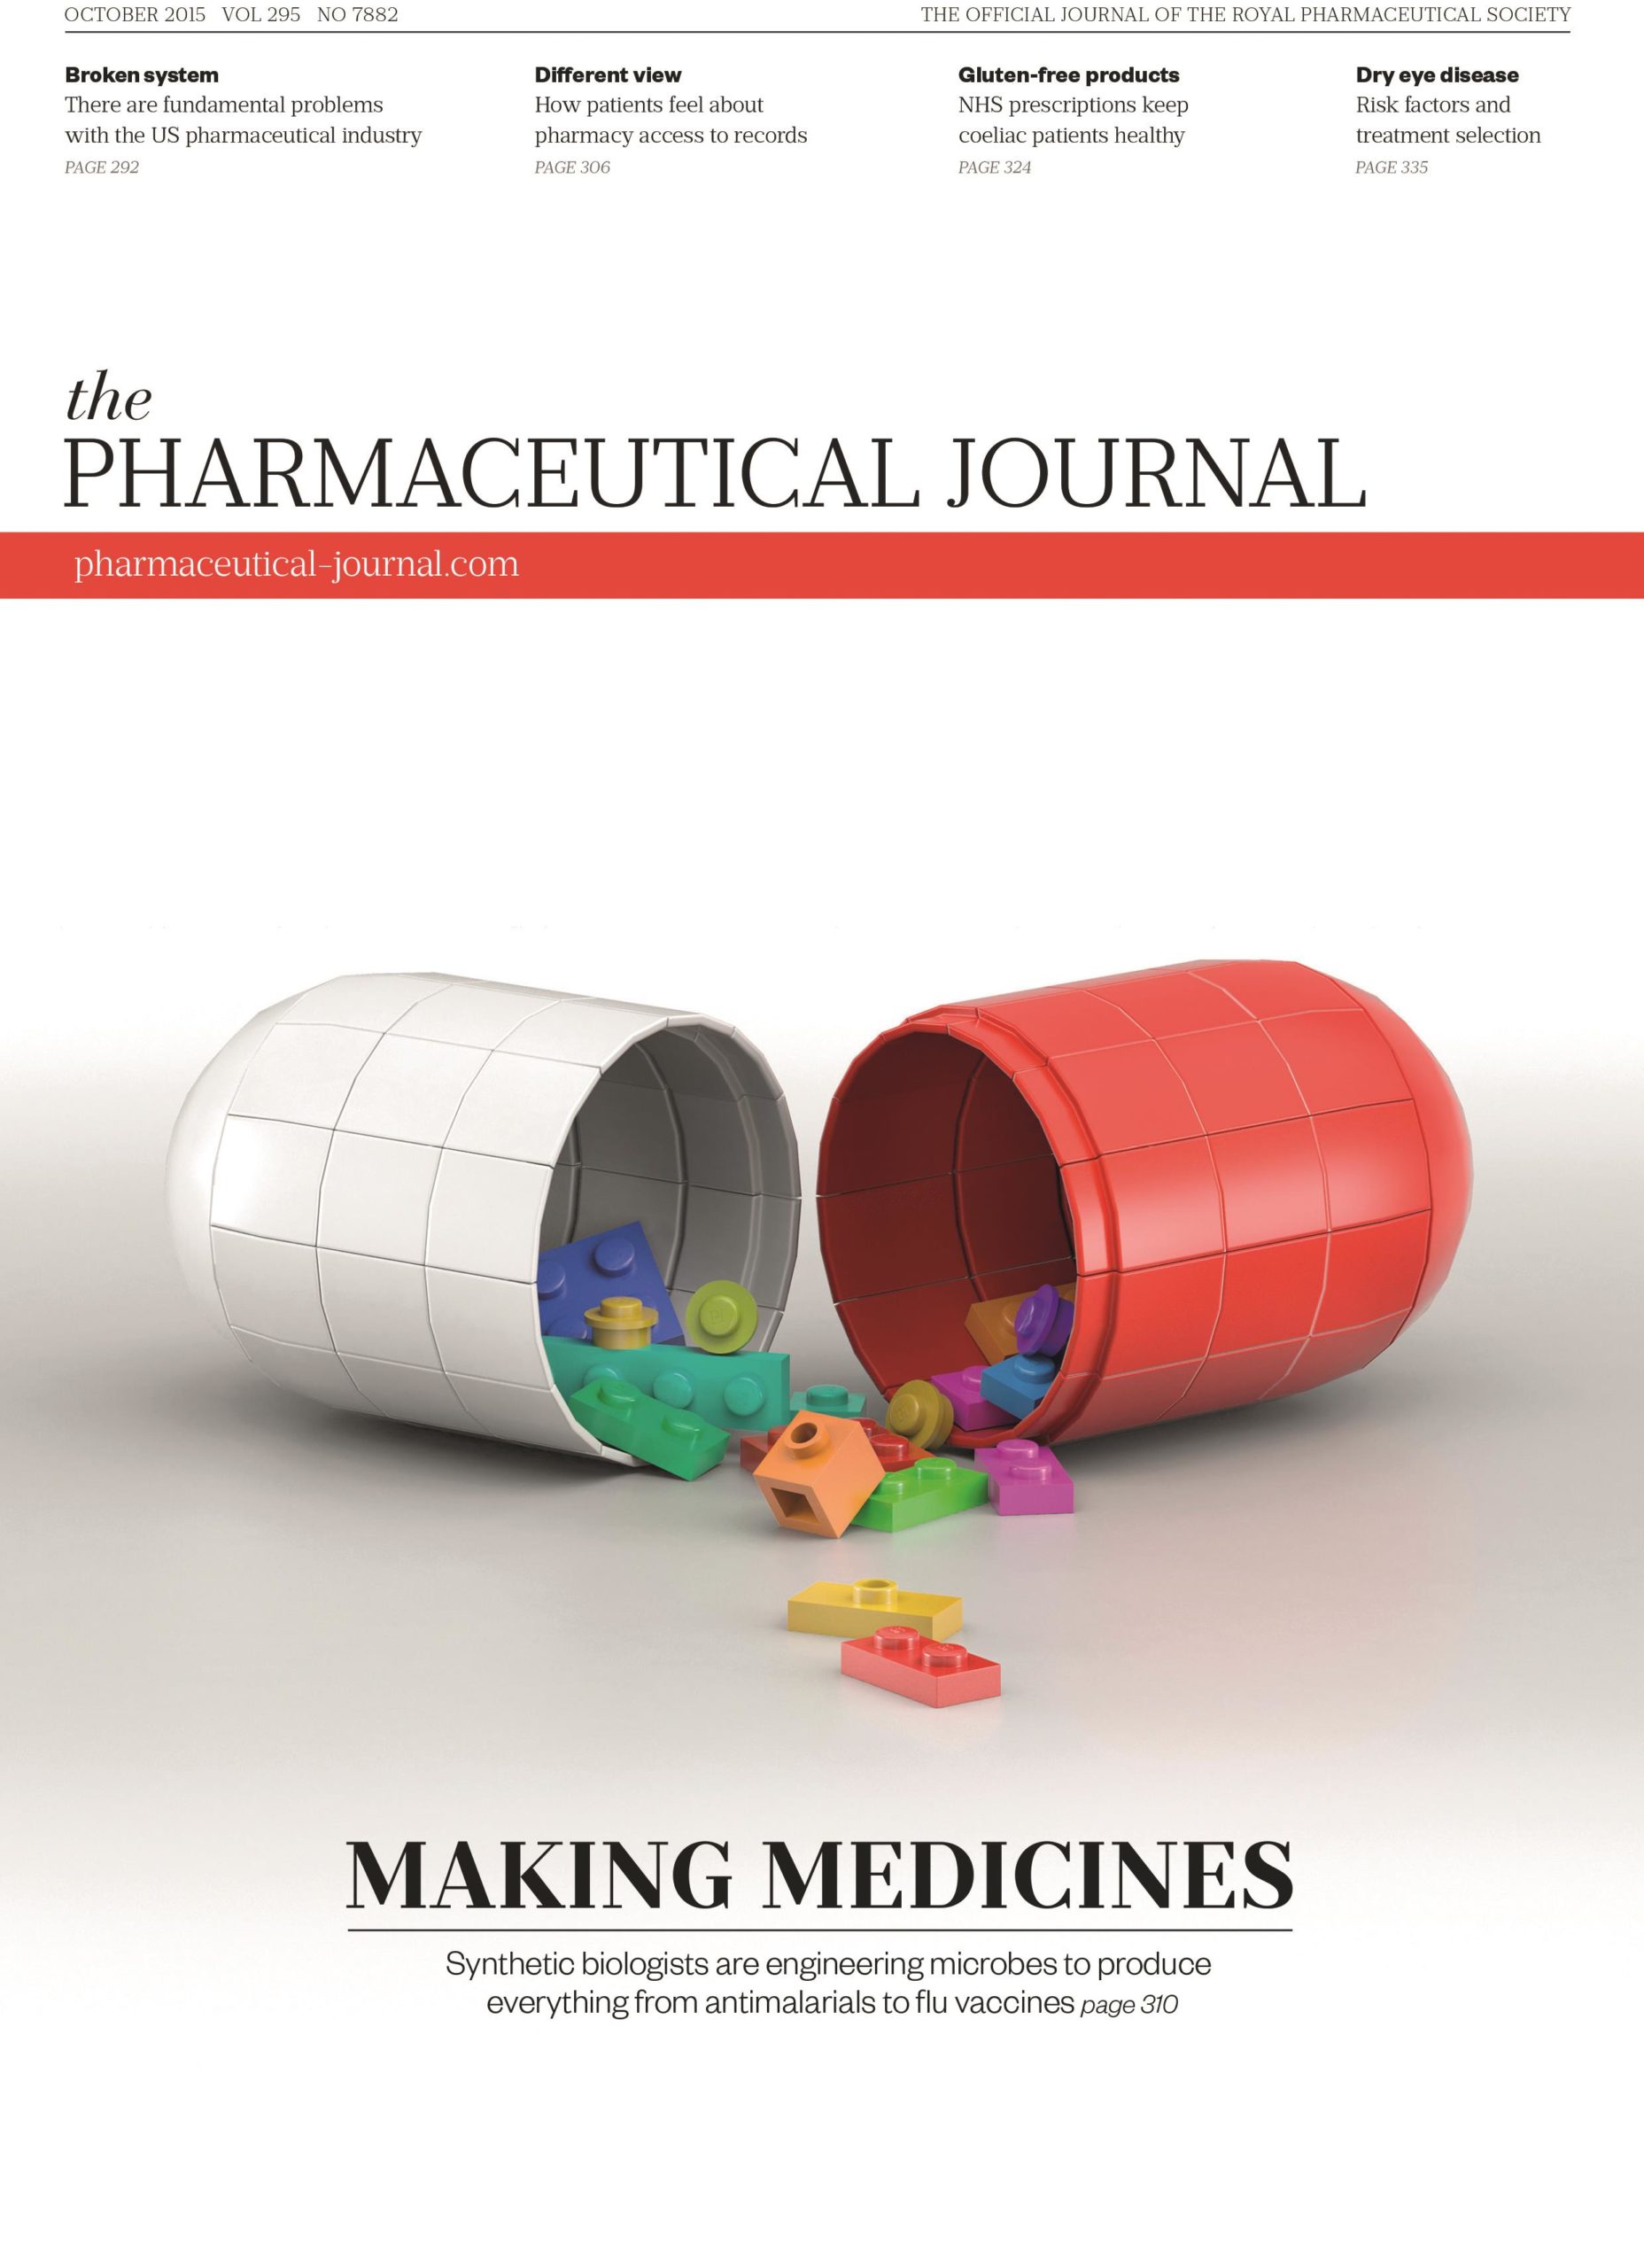 Publication issue cover for PJ, October 2015, Vol 295, No 7882